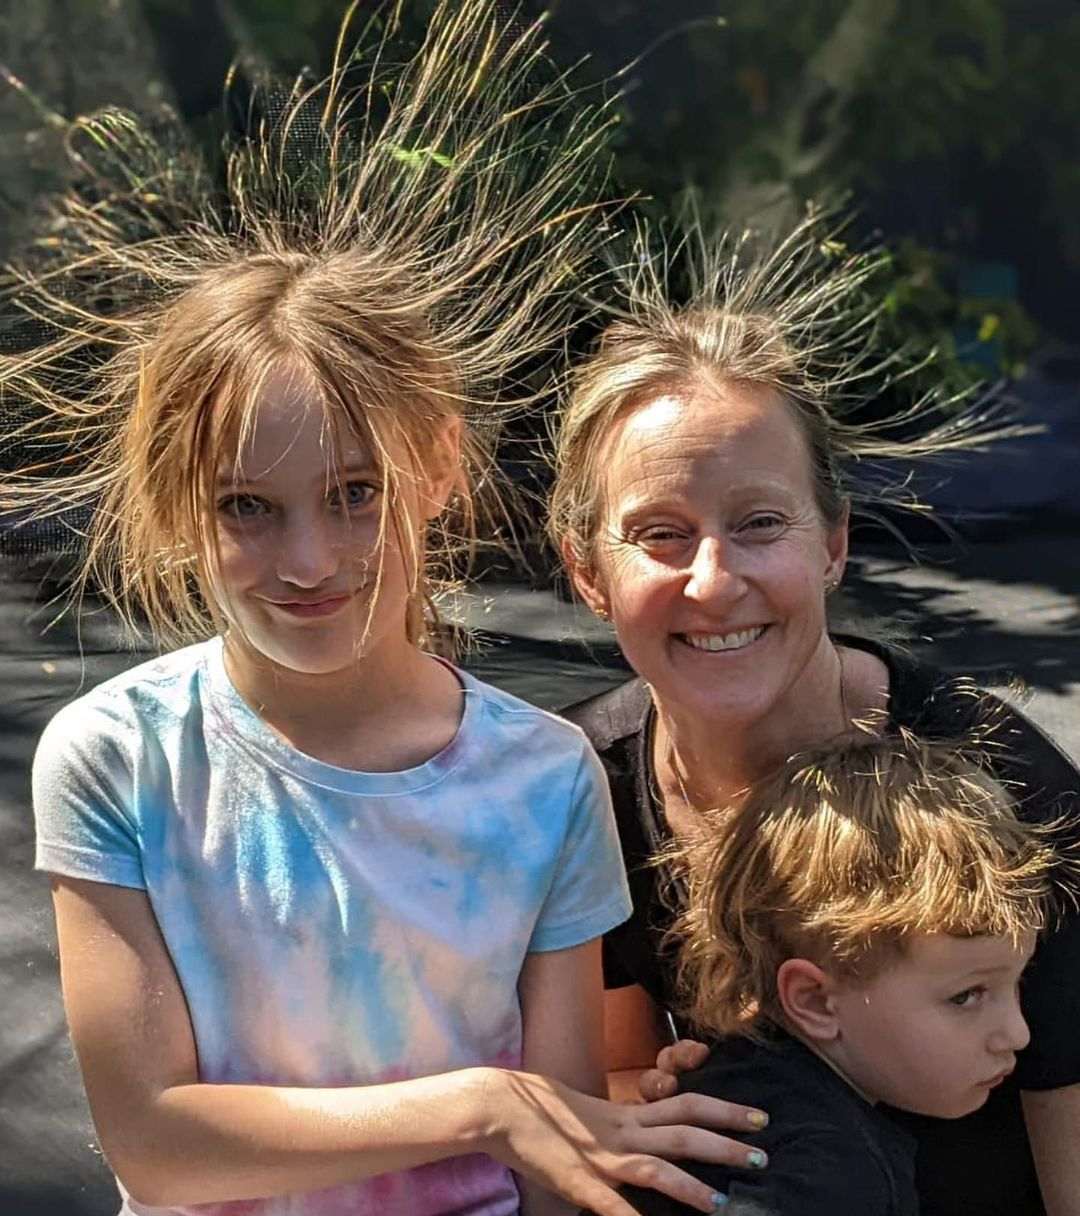 hair sticking straight up from static electricity